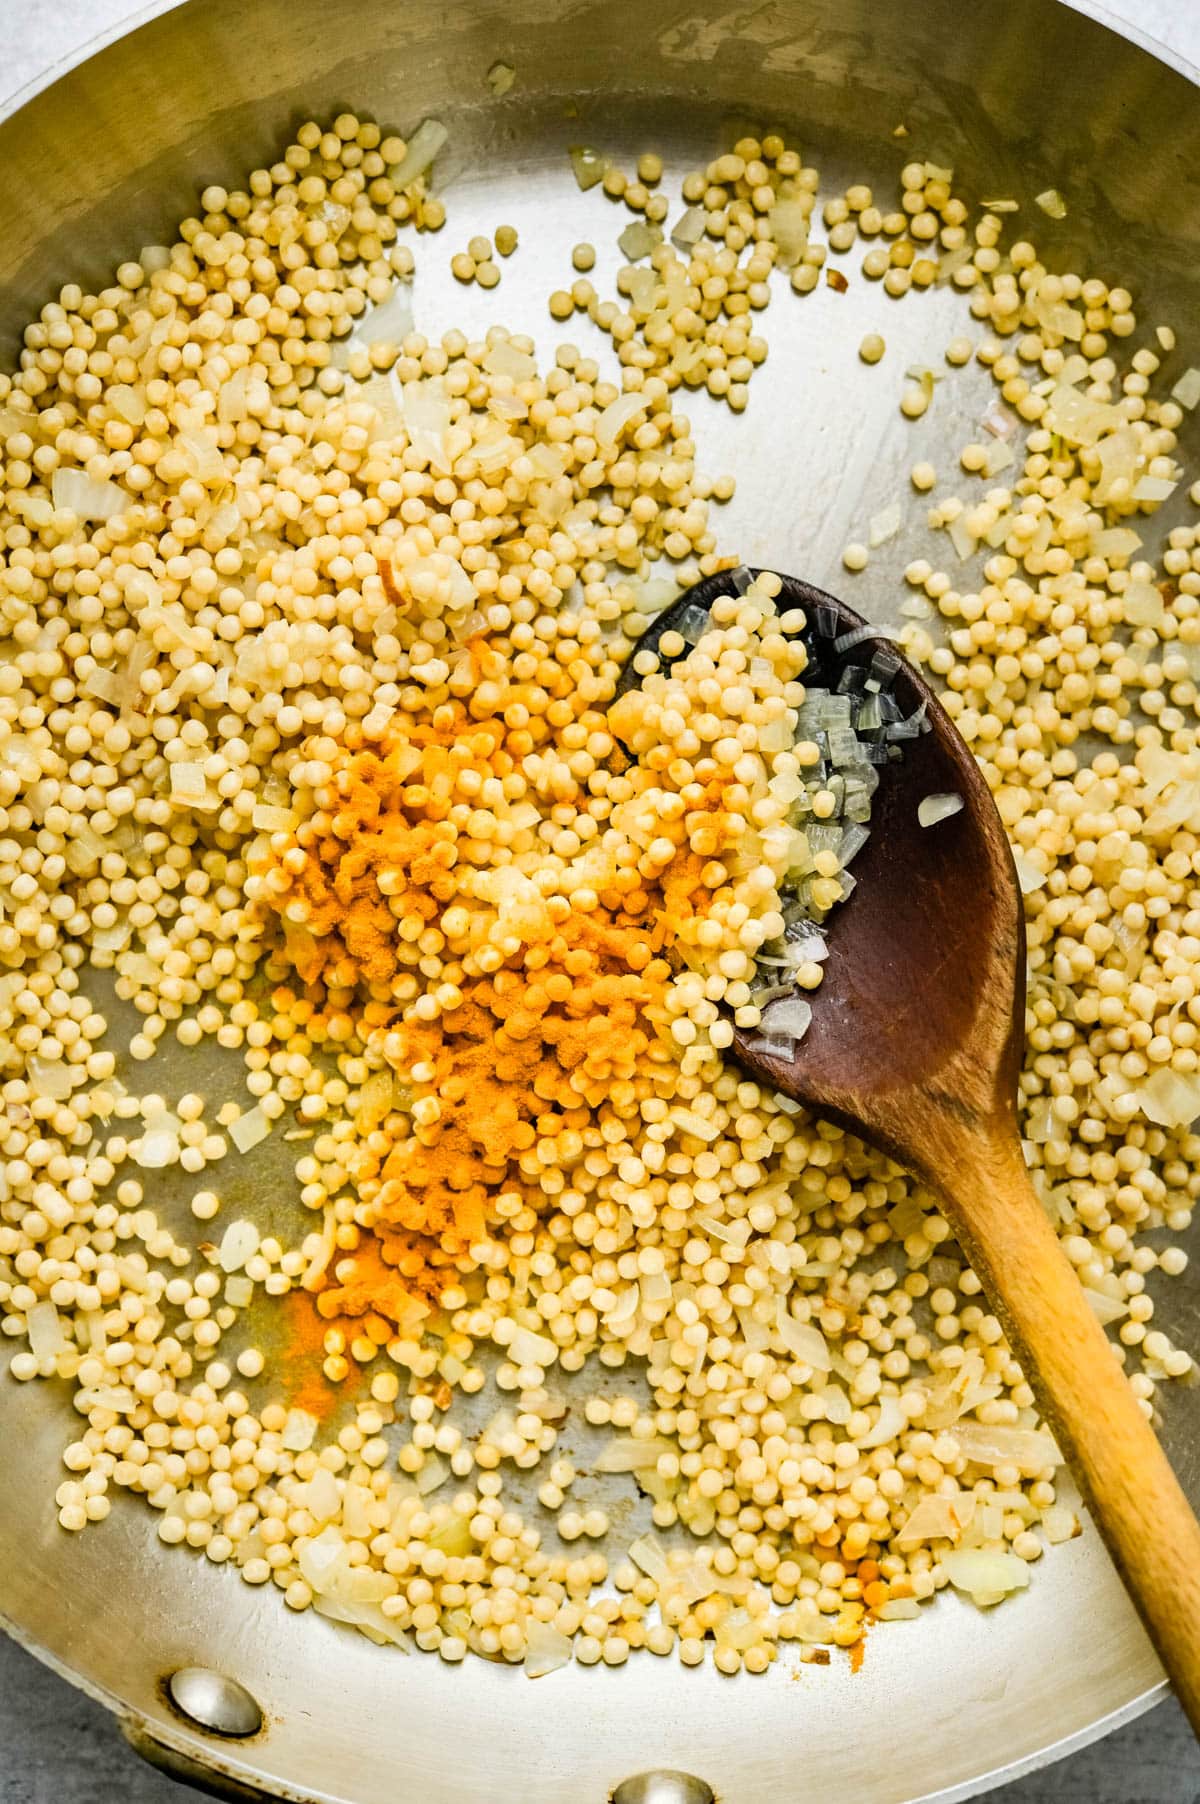 Adding Turmeric to the couscous.